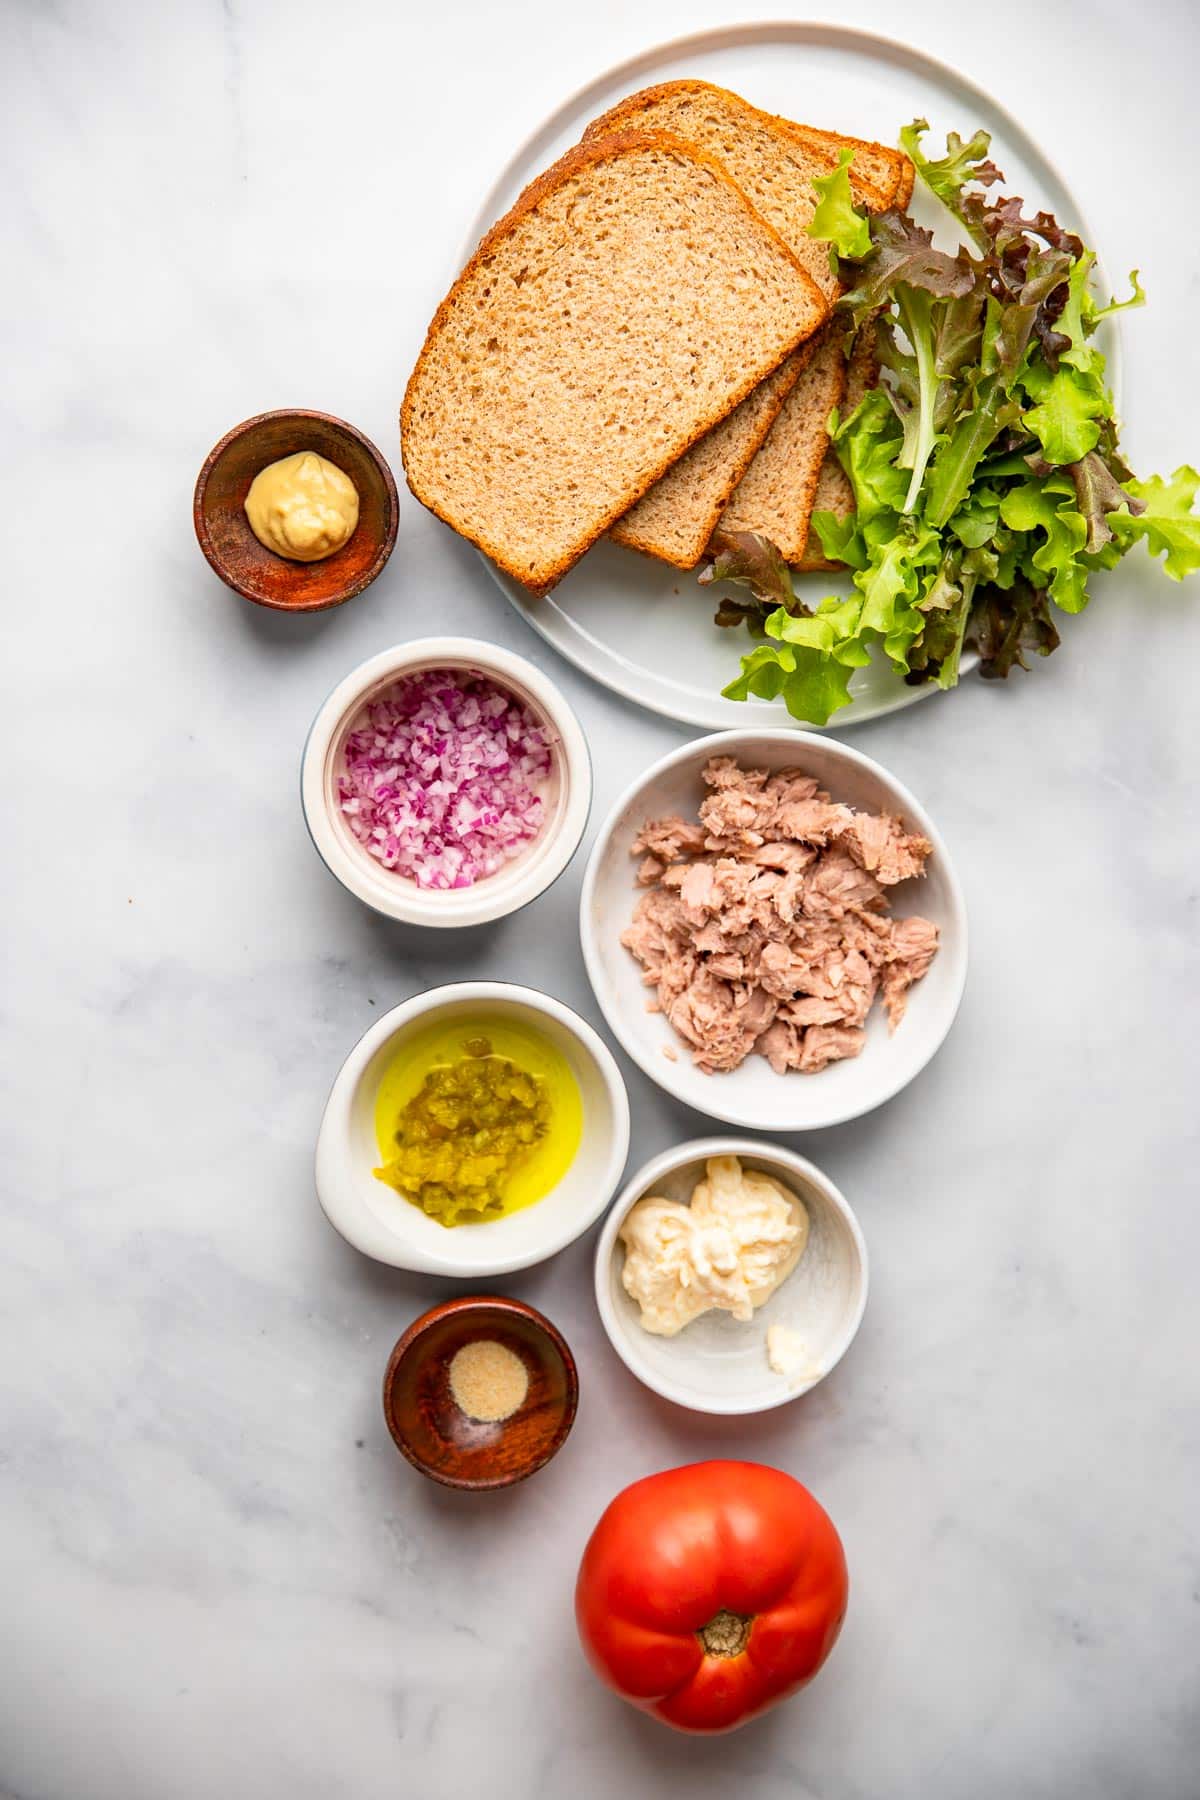 yellowfin tuna salad ingredients in small bowls on a white background.